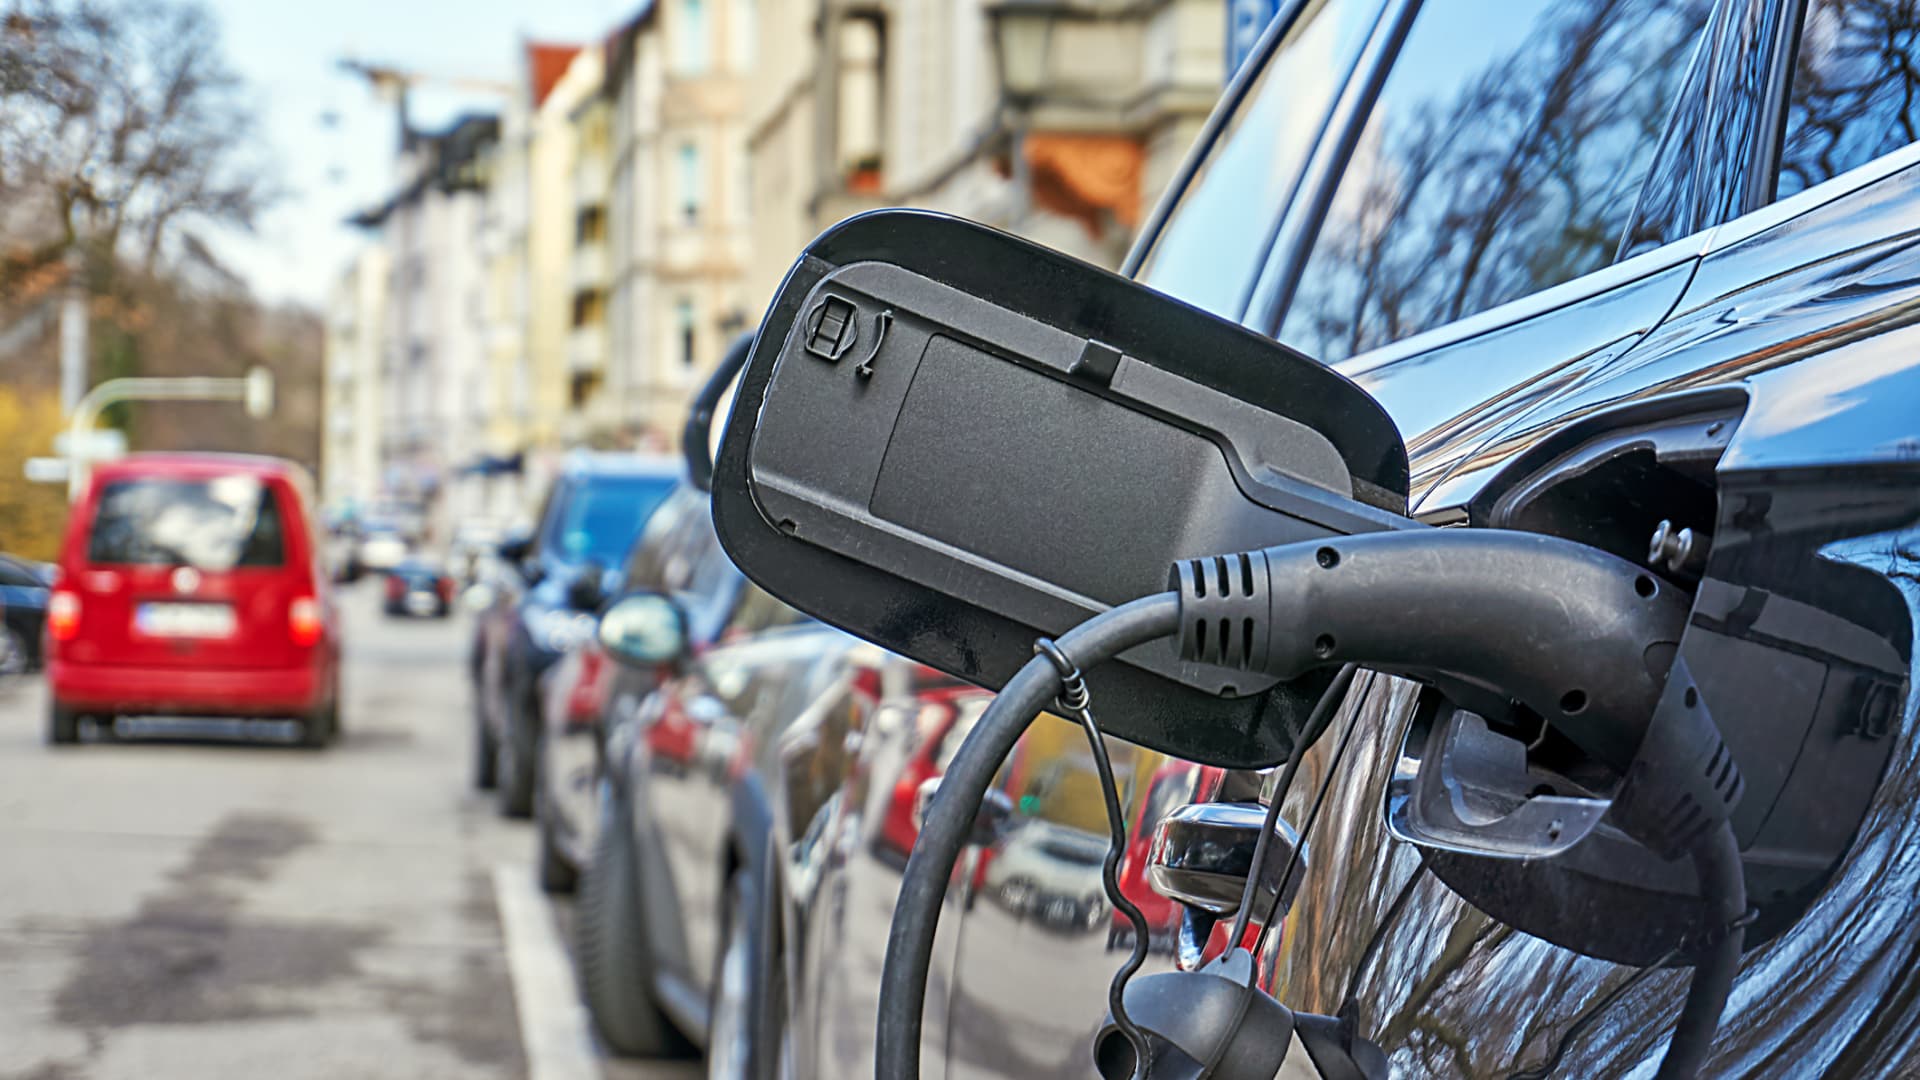 The ‘bummer’ of the $7,500 electric vehicle tax credit: Its full value may be hard to get Auto Recent